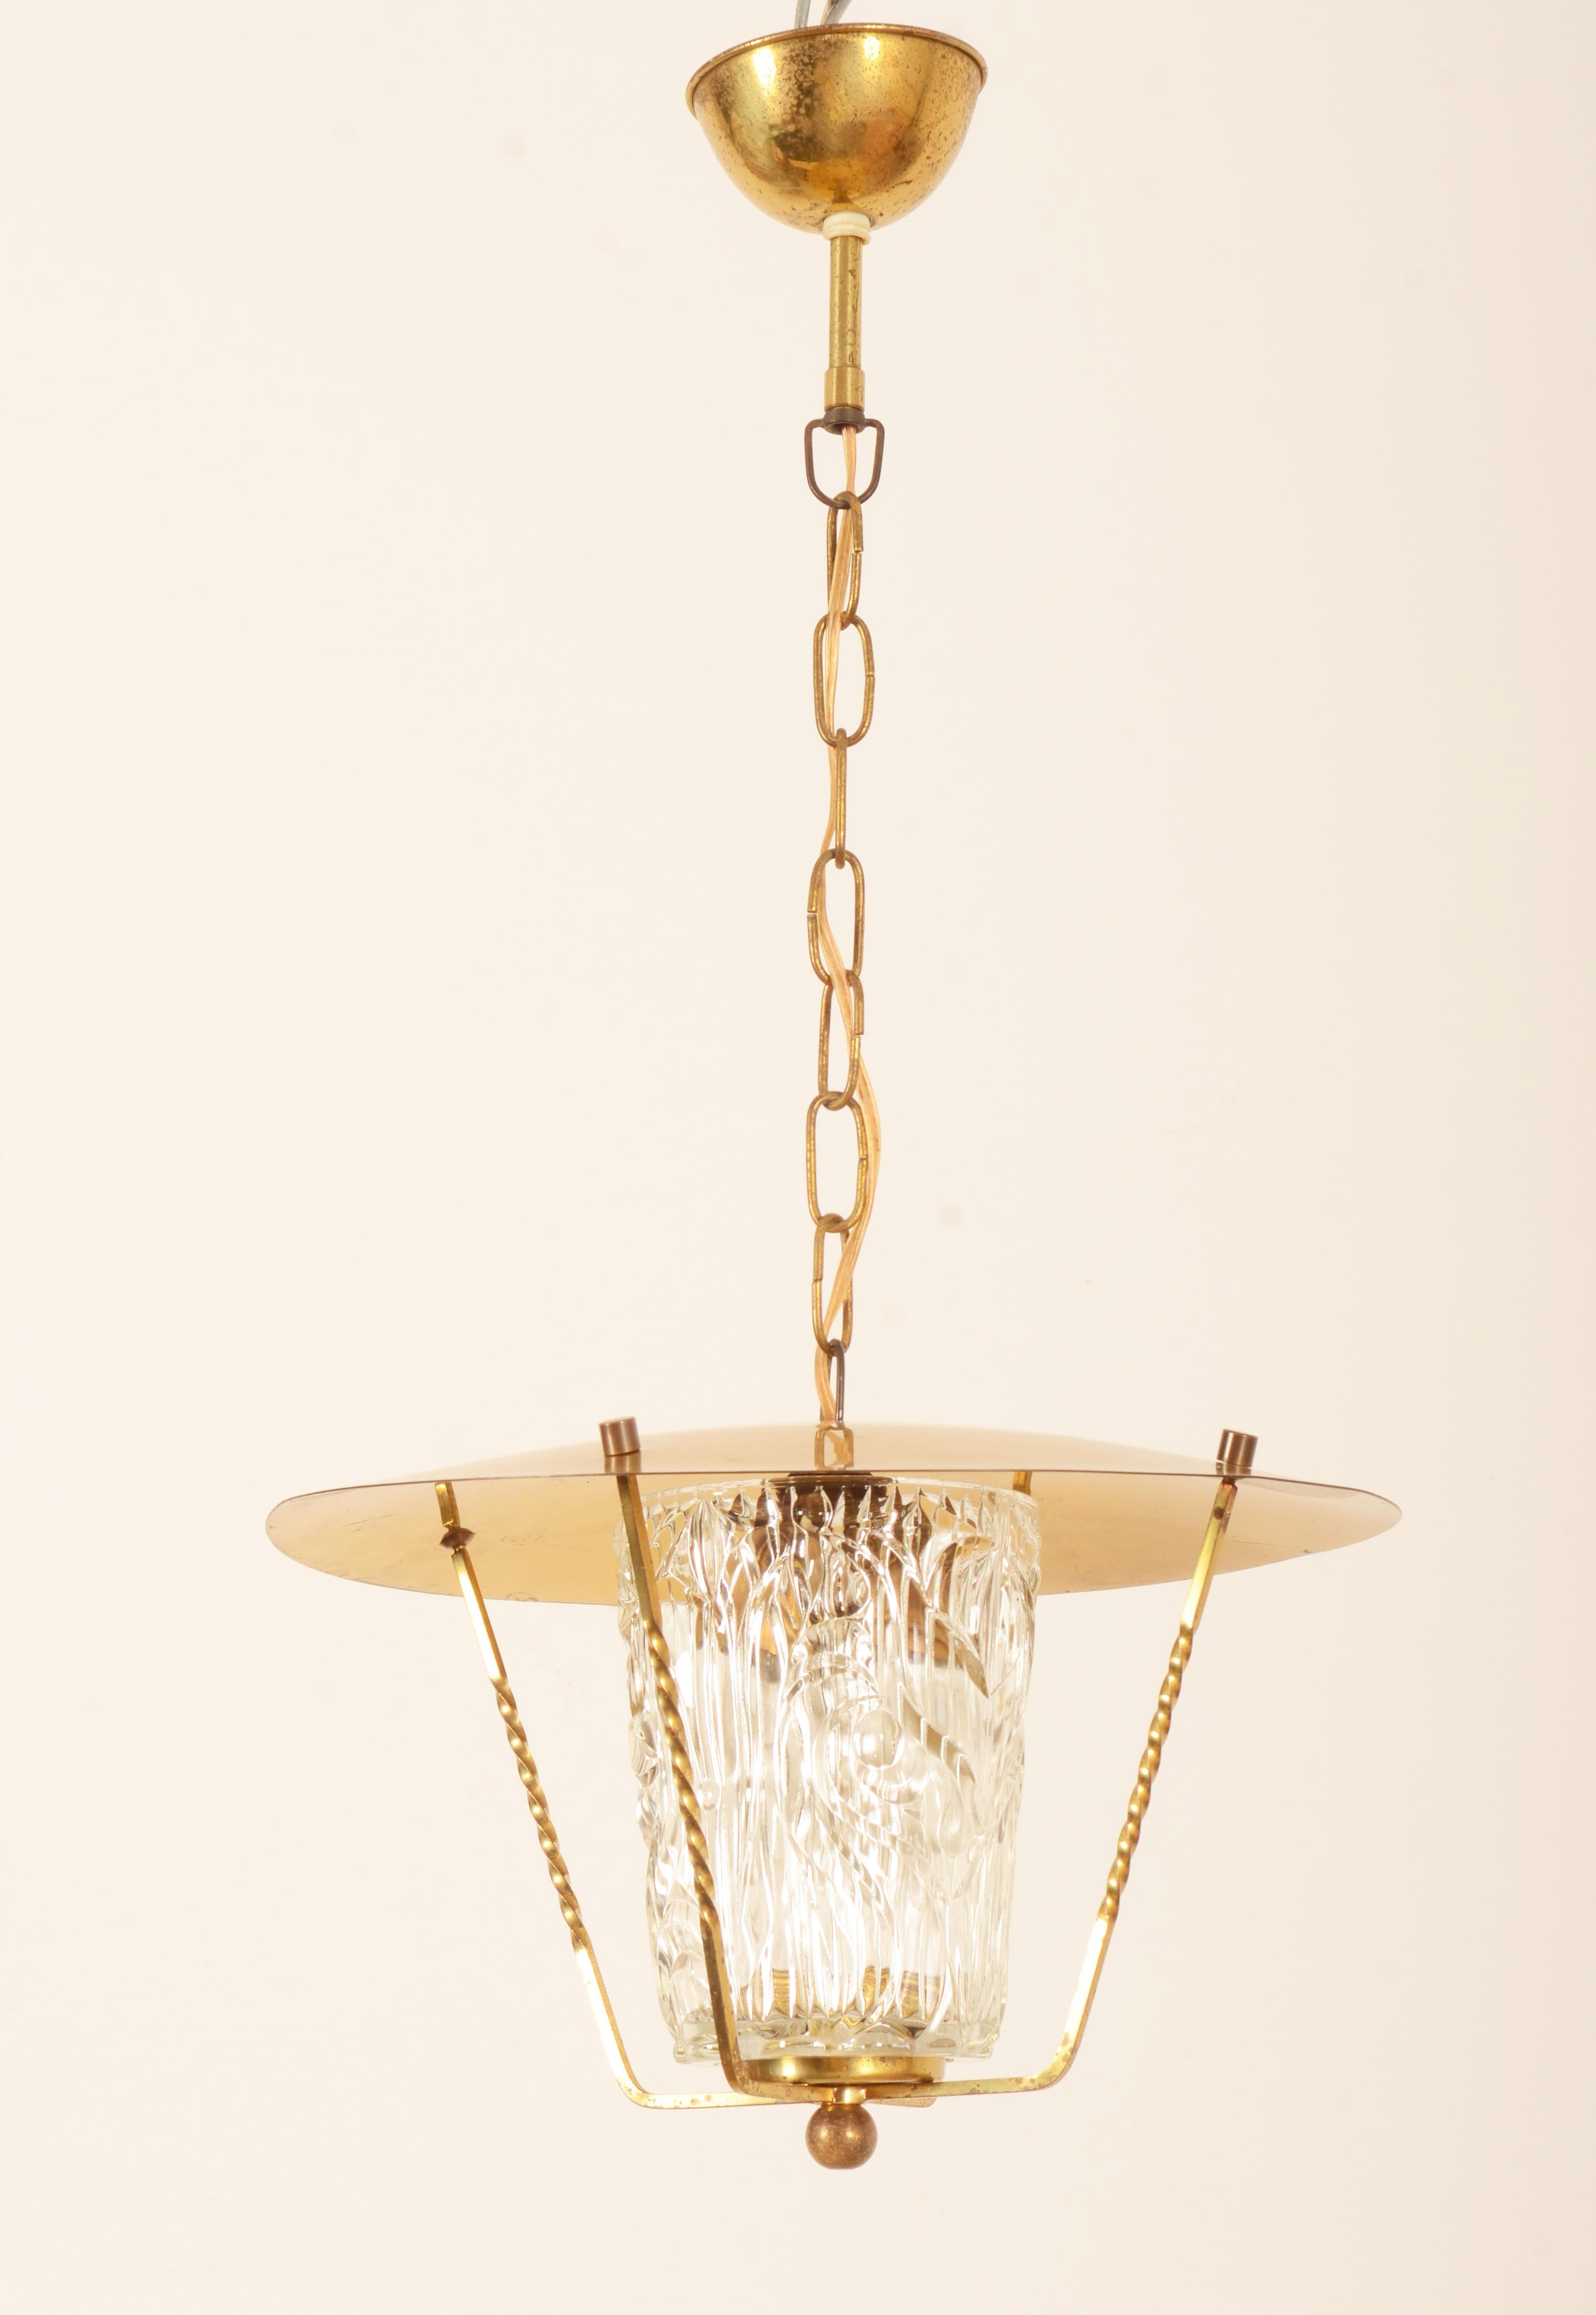 Mid-Century Modern Midcentury Brass Pendant Lamp With Structured Glass Shade 